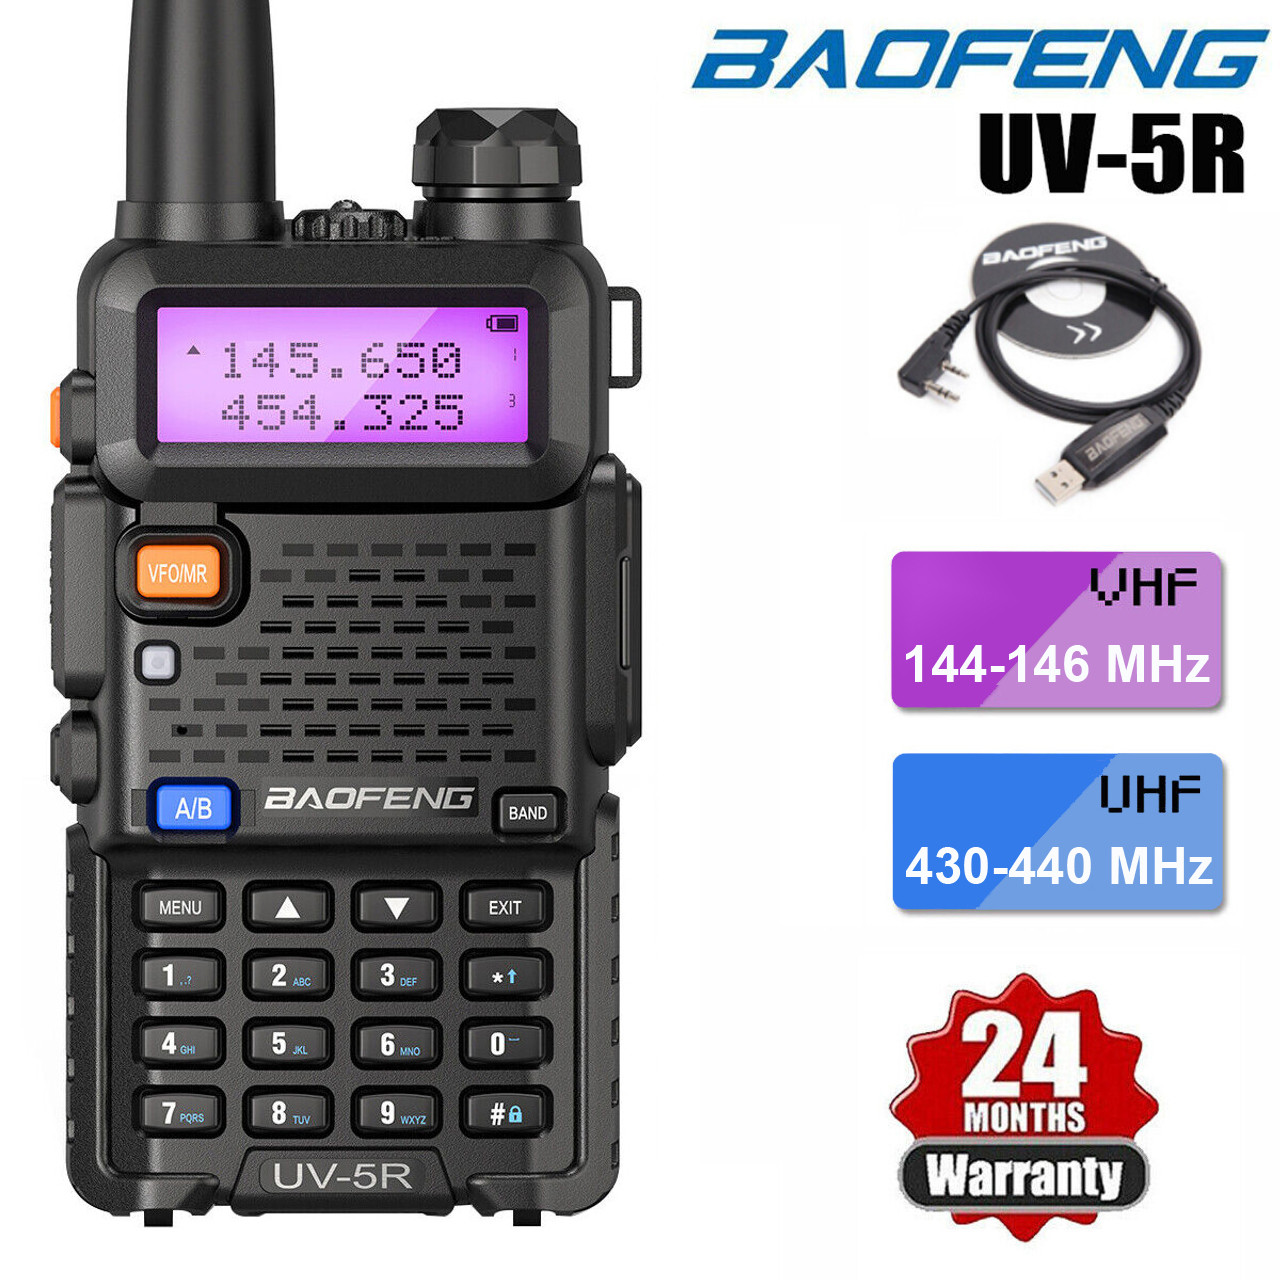 SALE／96%OFF】 TIDRADIO TD-H6 10Watt Ham Radio Handheld Upgraded from UV-5R  Dual Band Walkie Talkies with Extra 2200mAh Battery, Programming Cable, Speaker  Mic and T